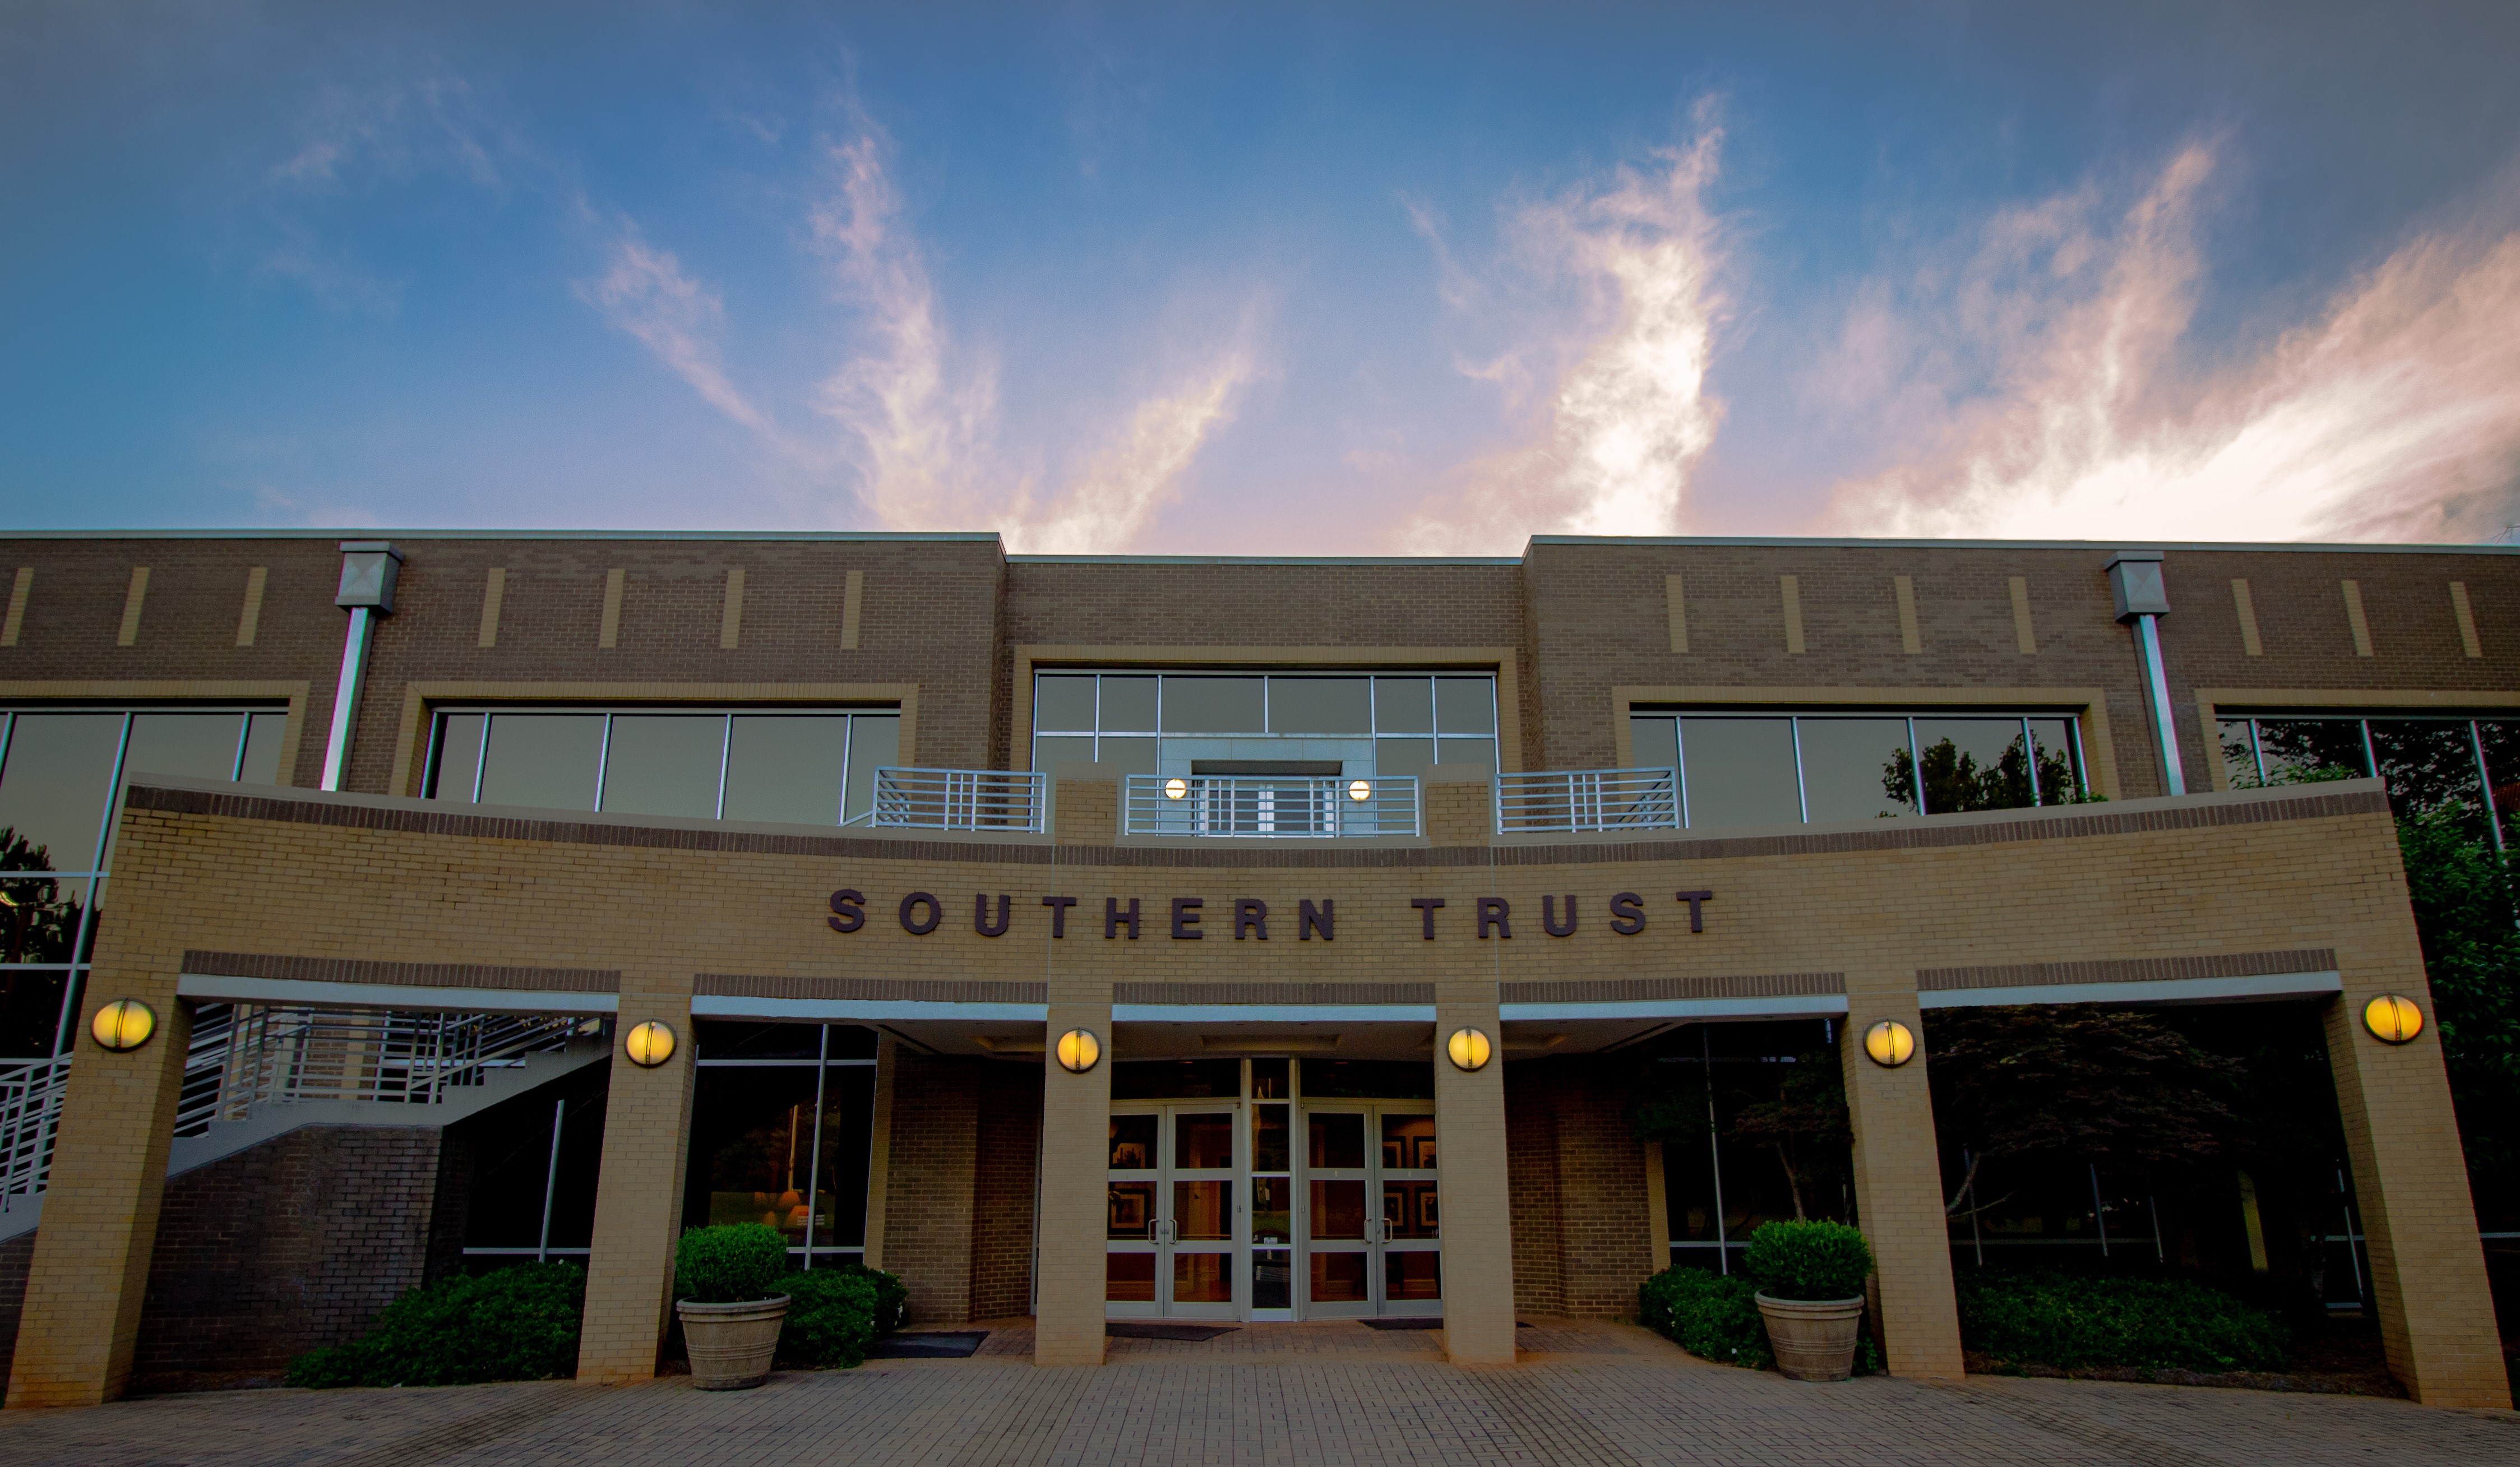 The Southern Trust Building in Macon